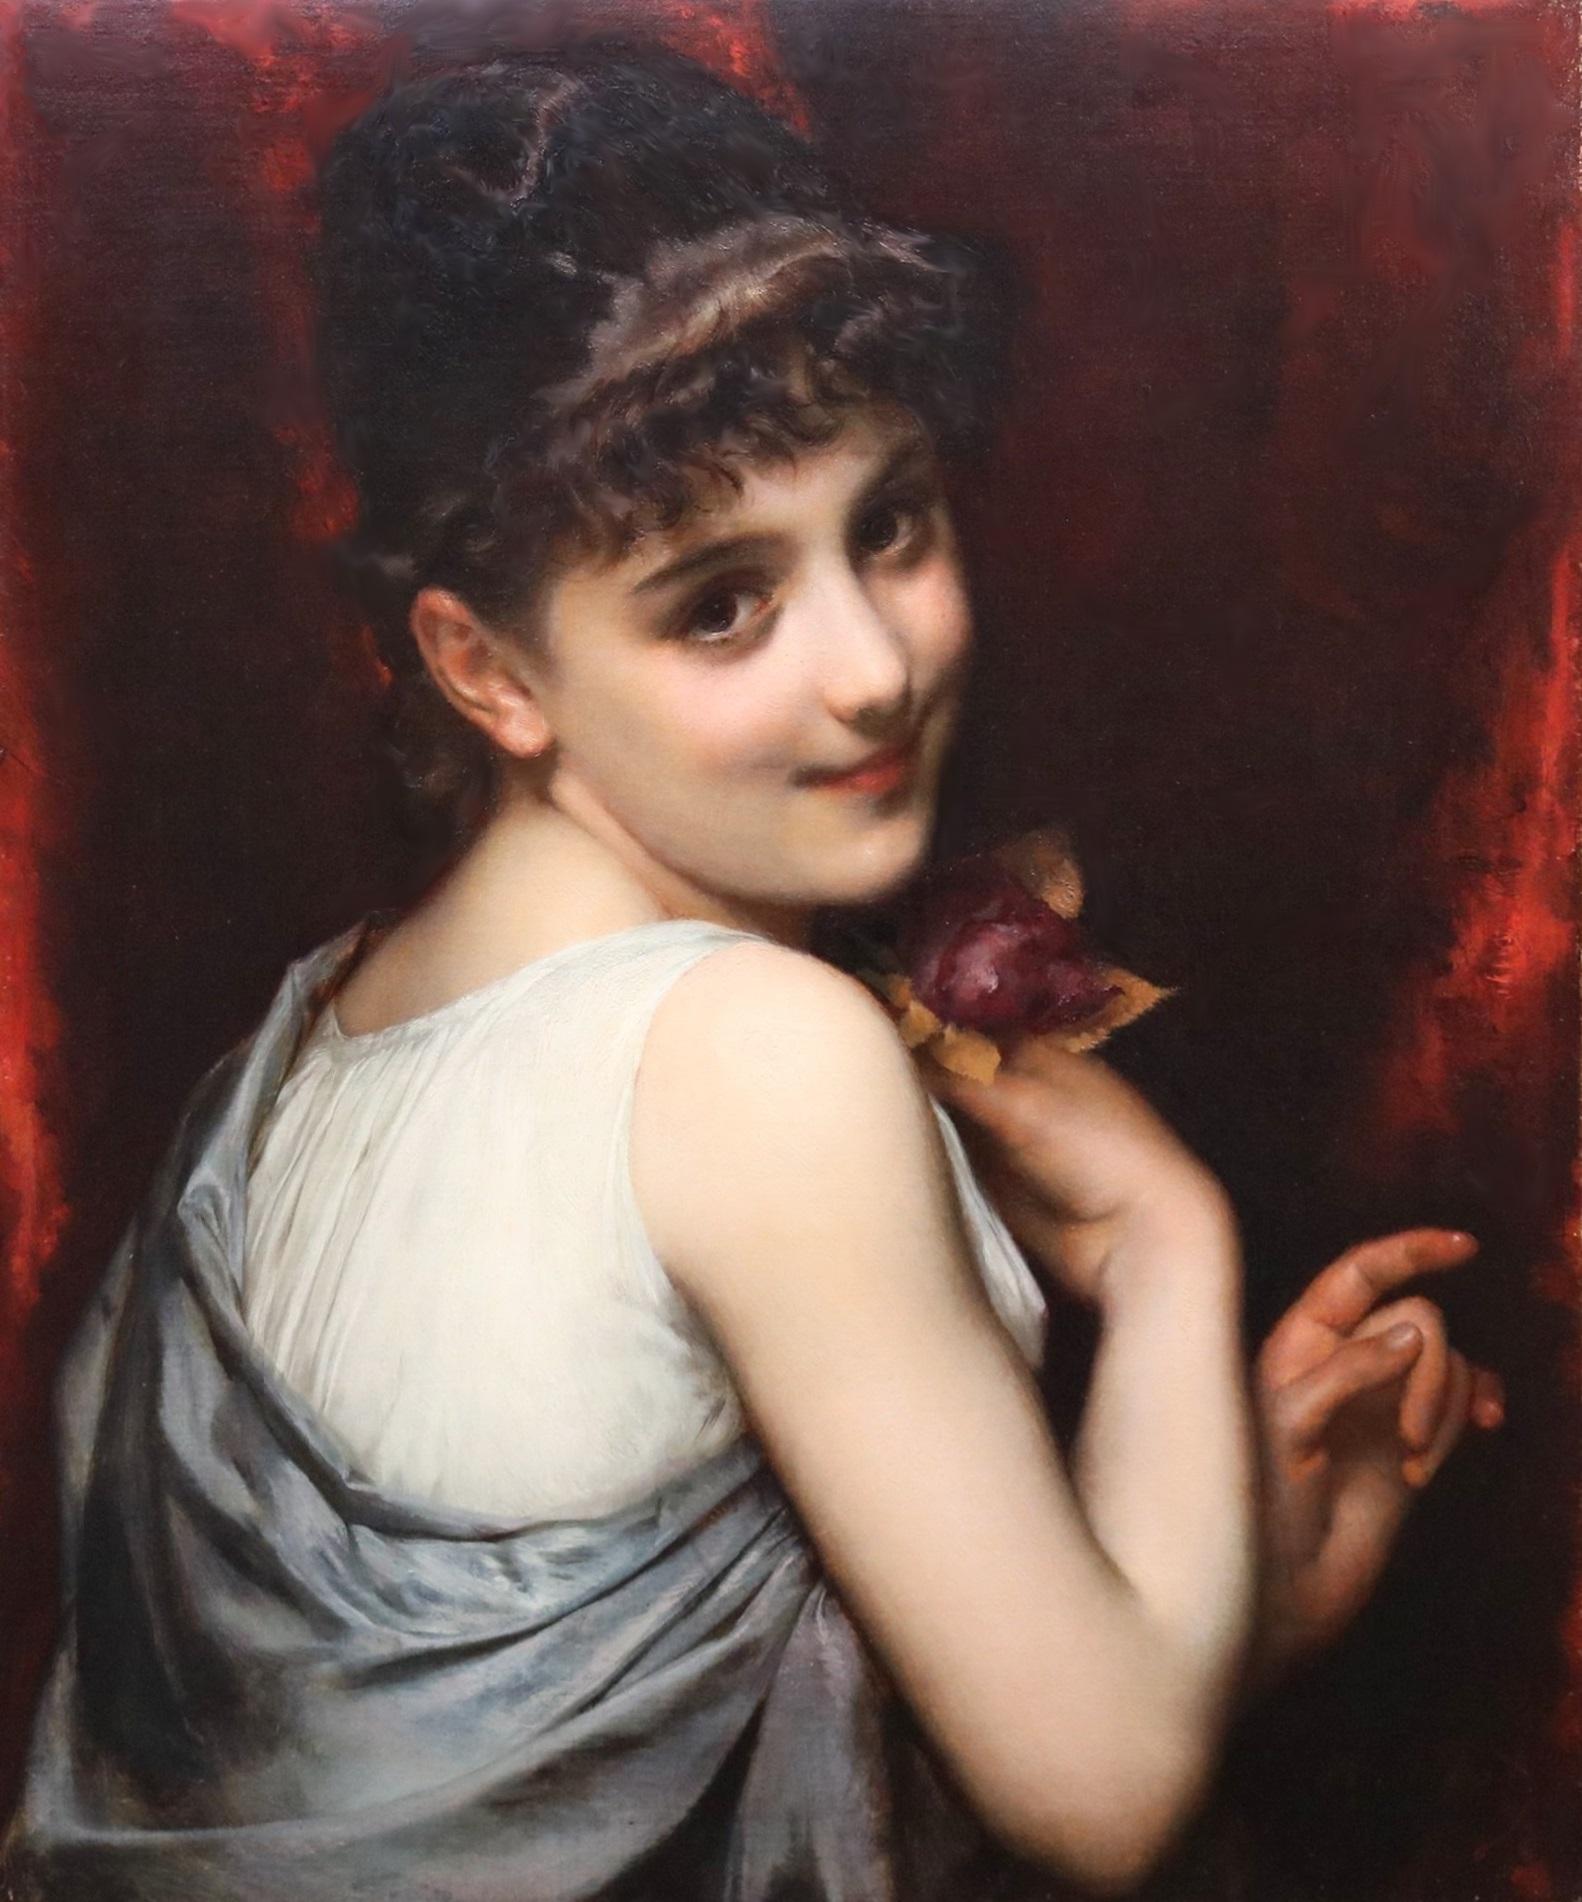 Young Belle Epoque Beauty - 19th Century Portrait Oil Painting of French Girl  For Sale 1